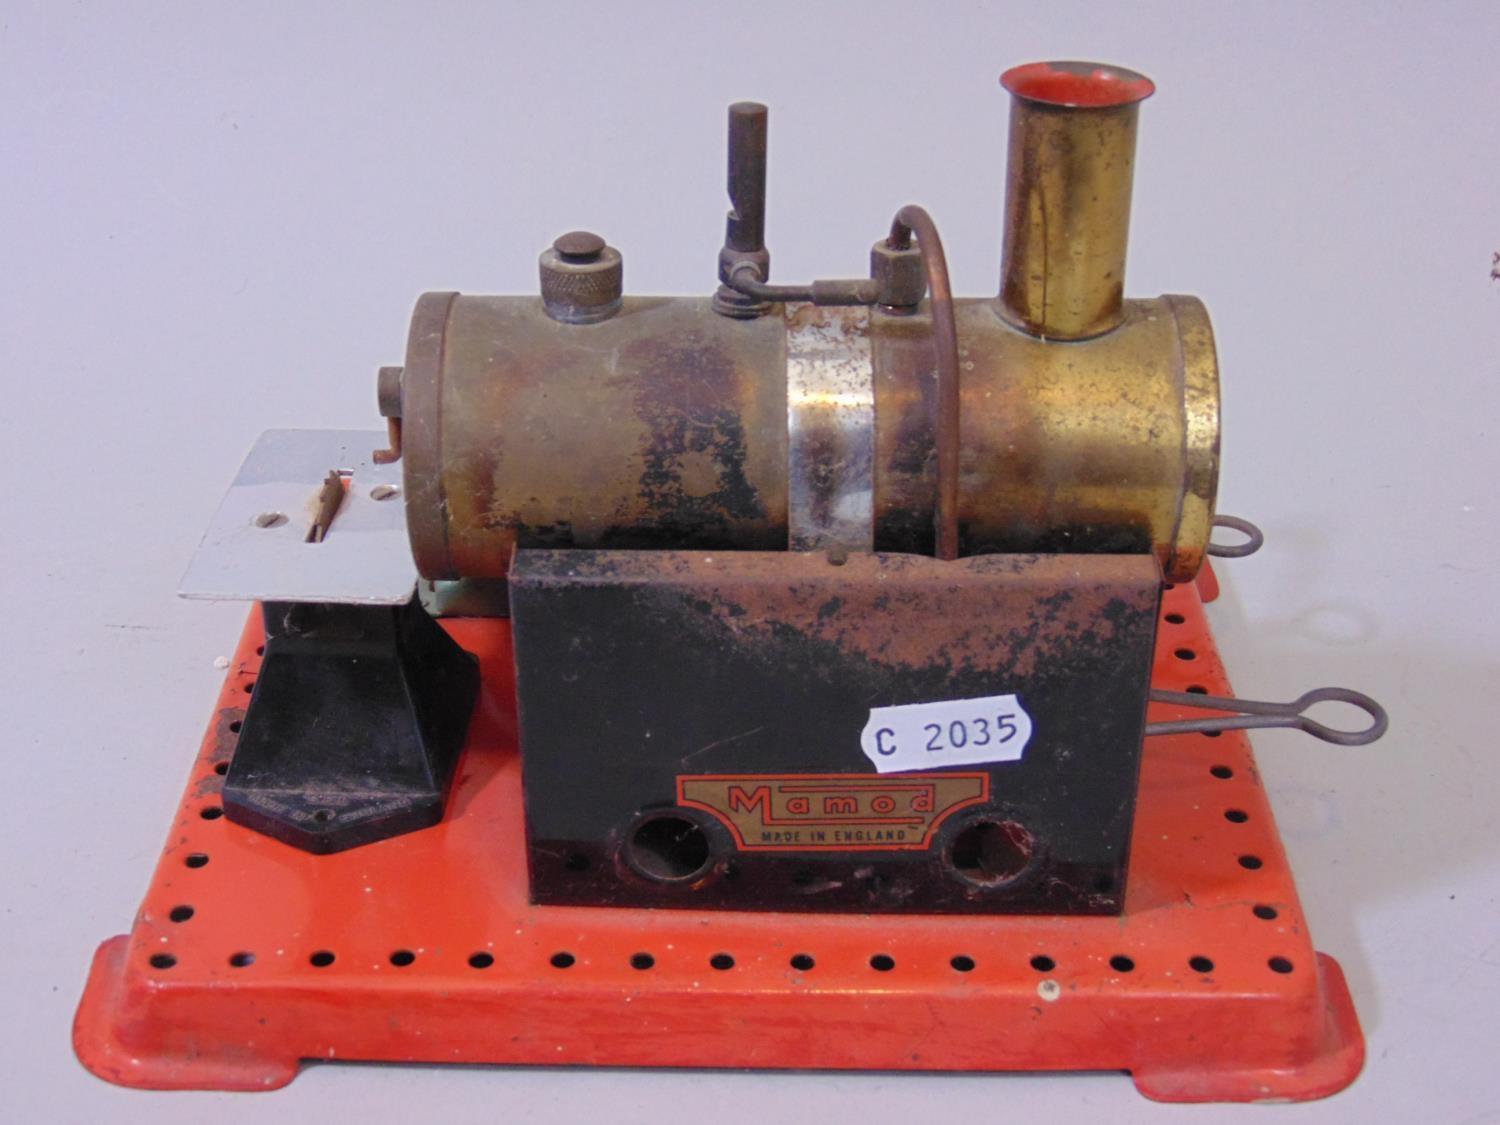 Mamod model steam engine with rotary saw, unboxed